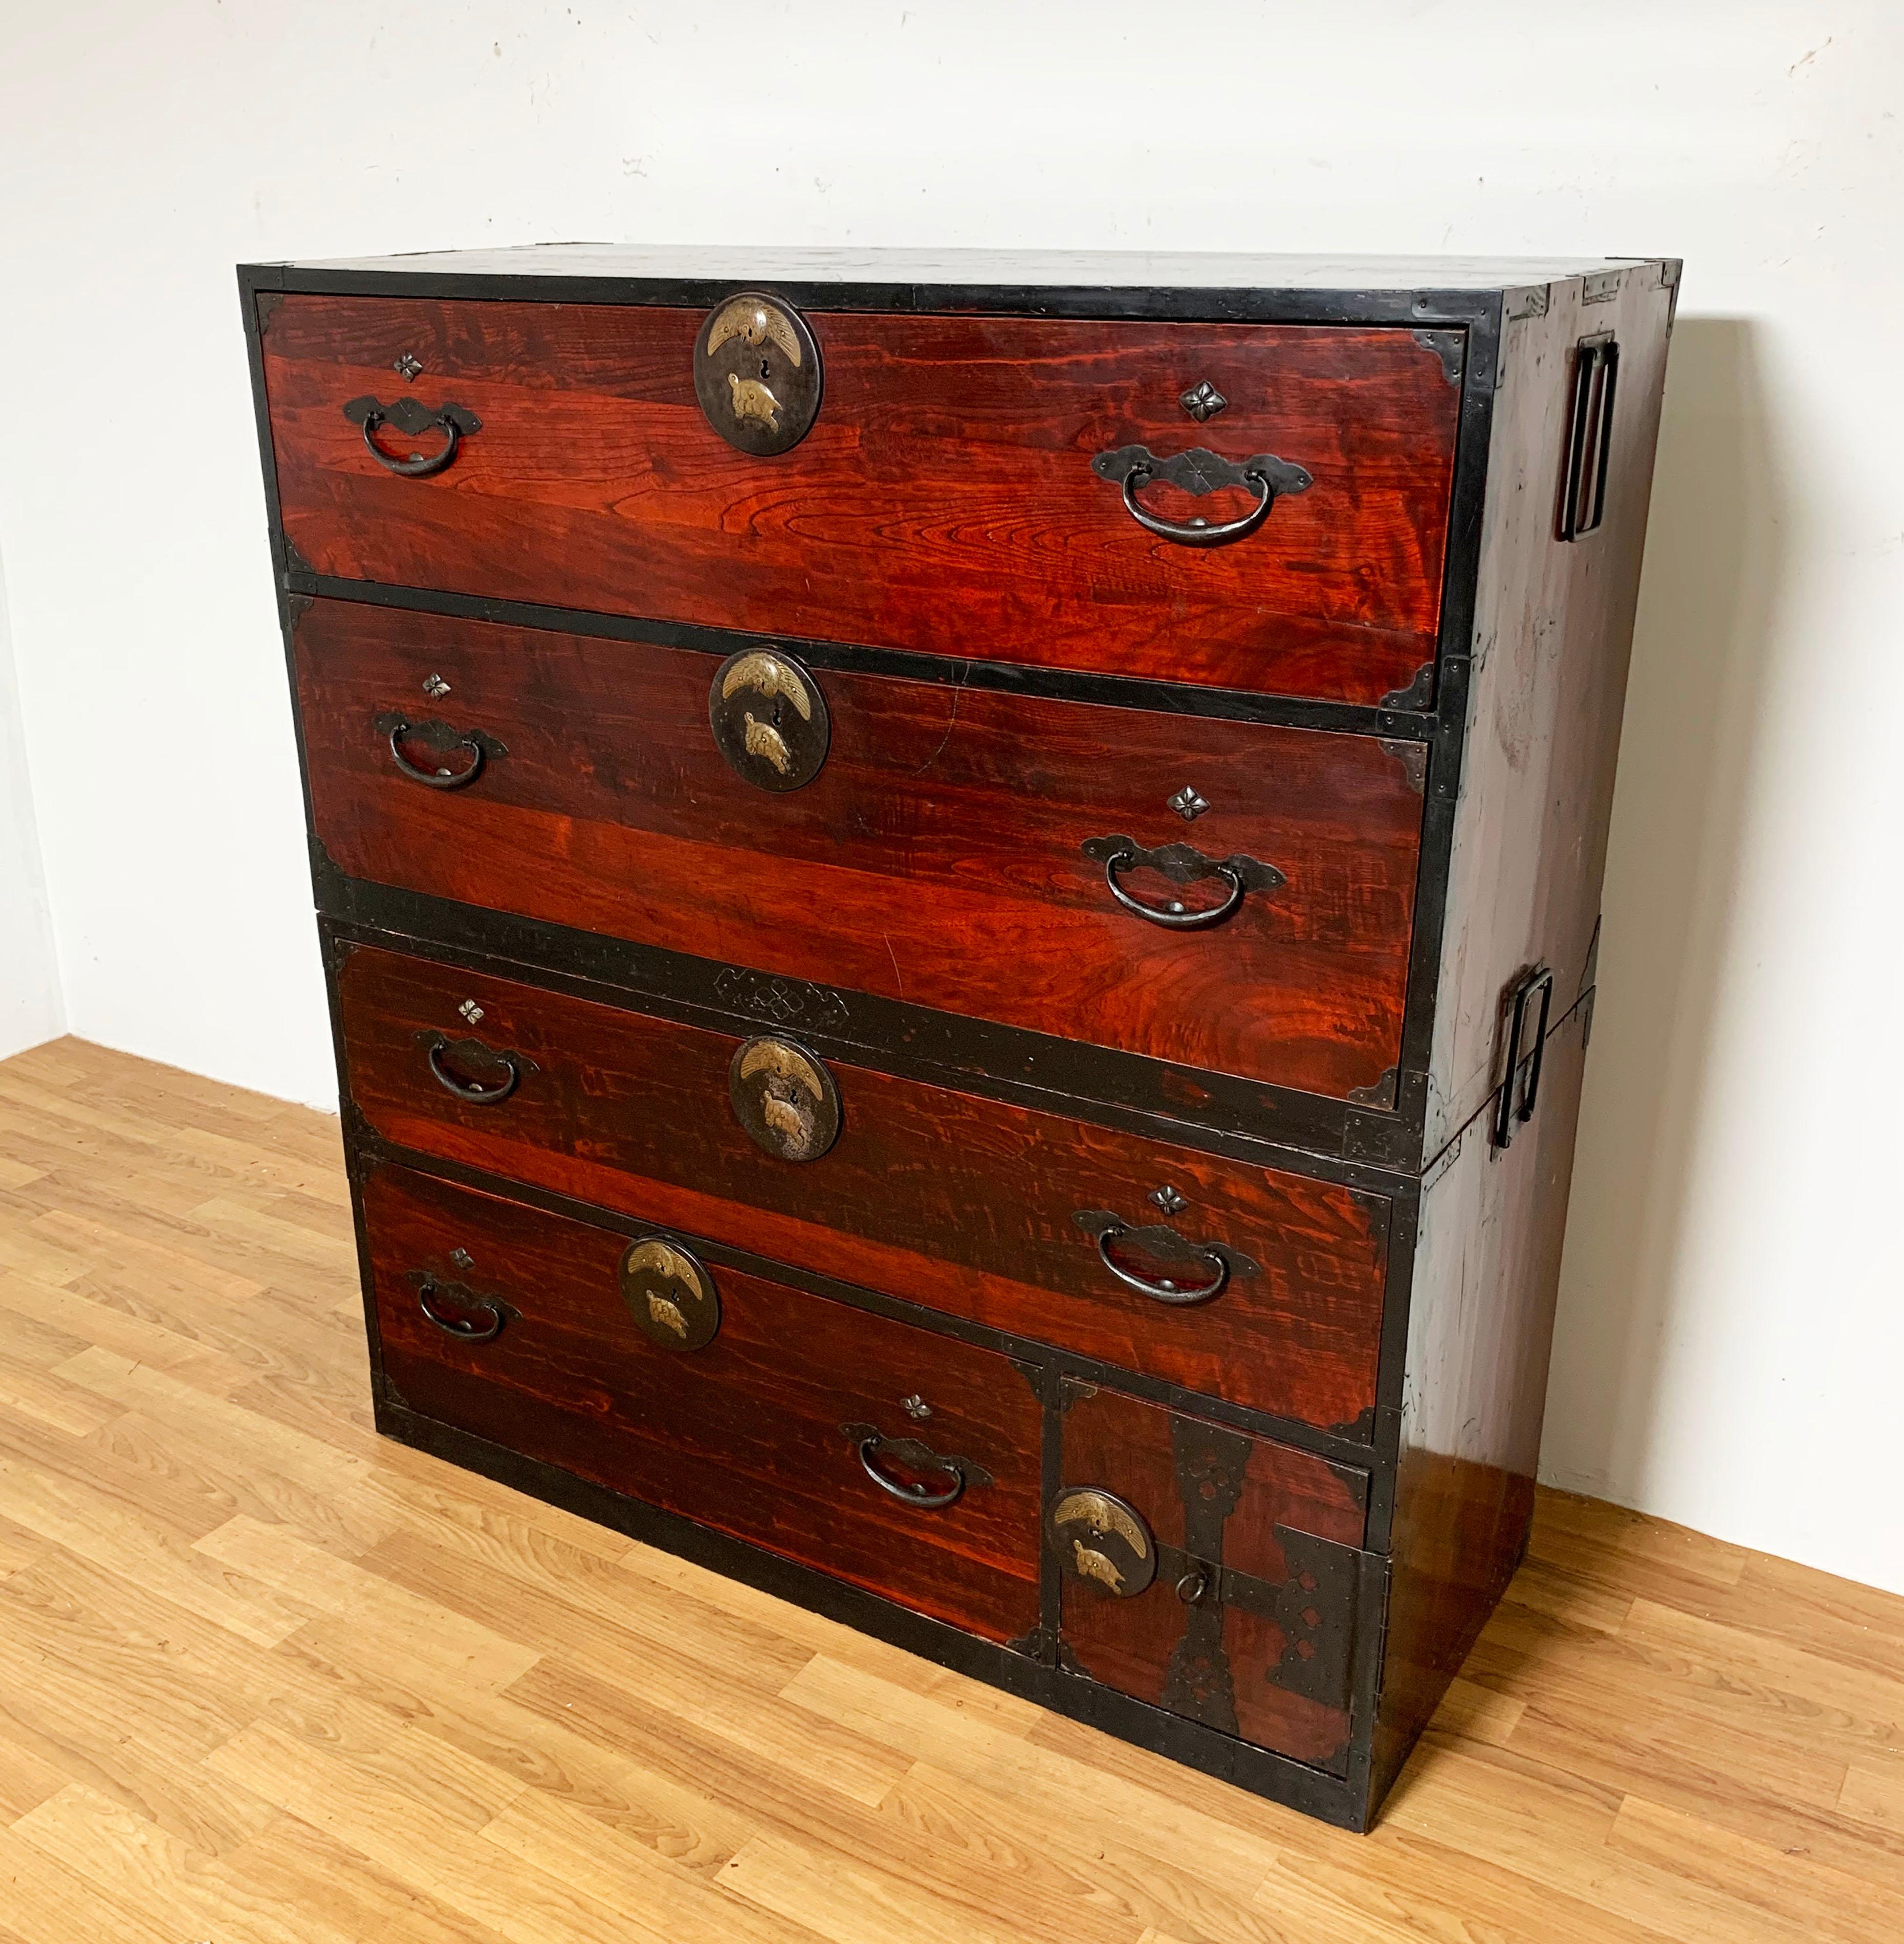 An antique 19th century Japanese Meiji period two piece tansu chest in red lacquer and akamatsu wood with hand forged iron hardware and applied brass “Tsuru-Kame” decoration depicting a crane and tortoise. These symbols are considered among the